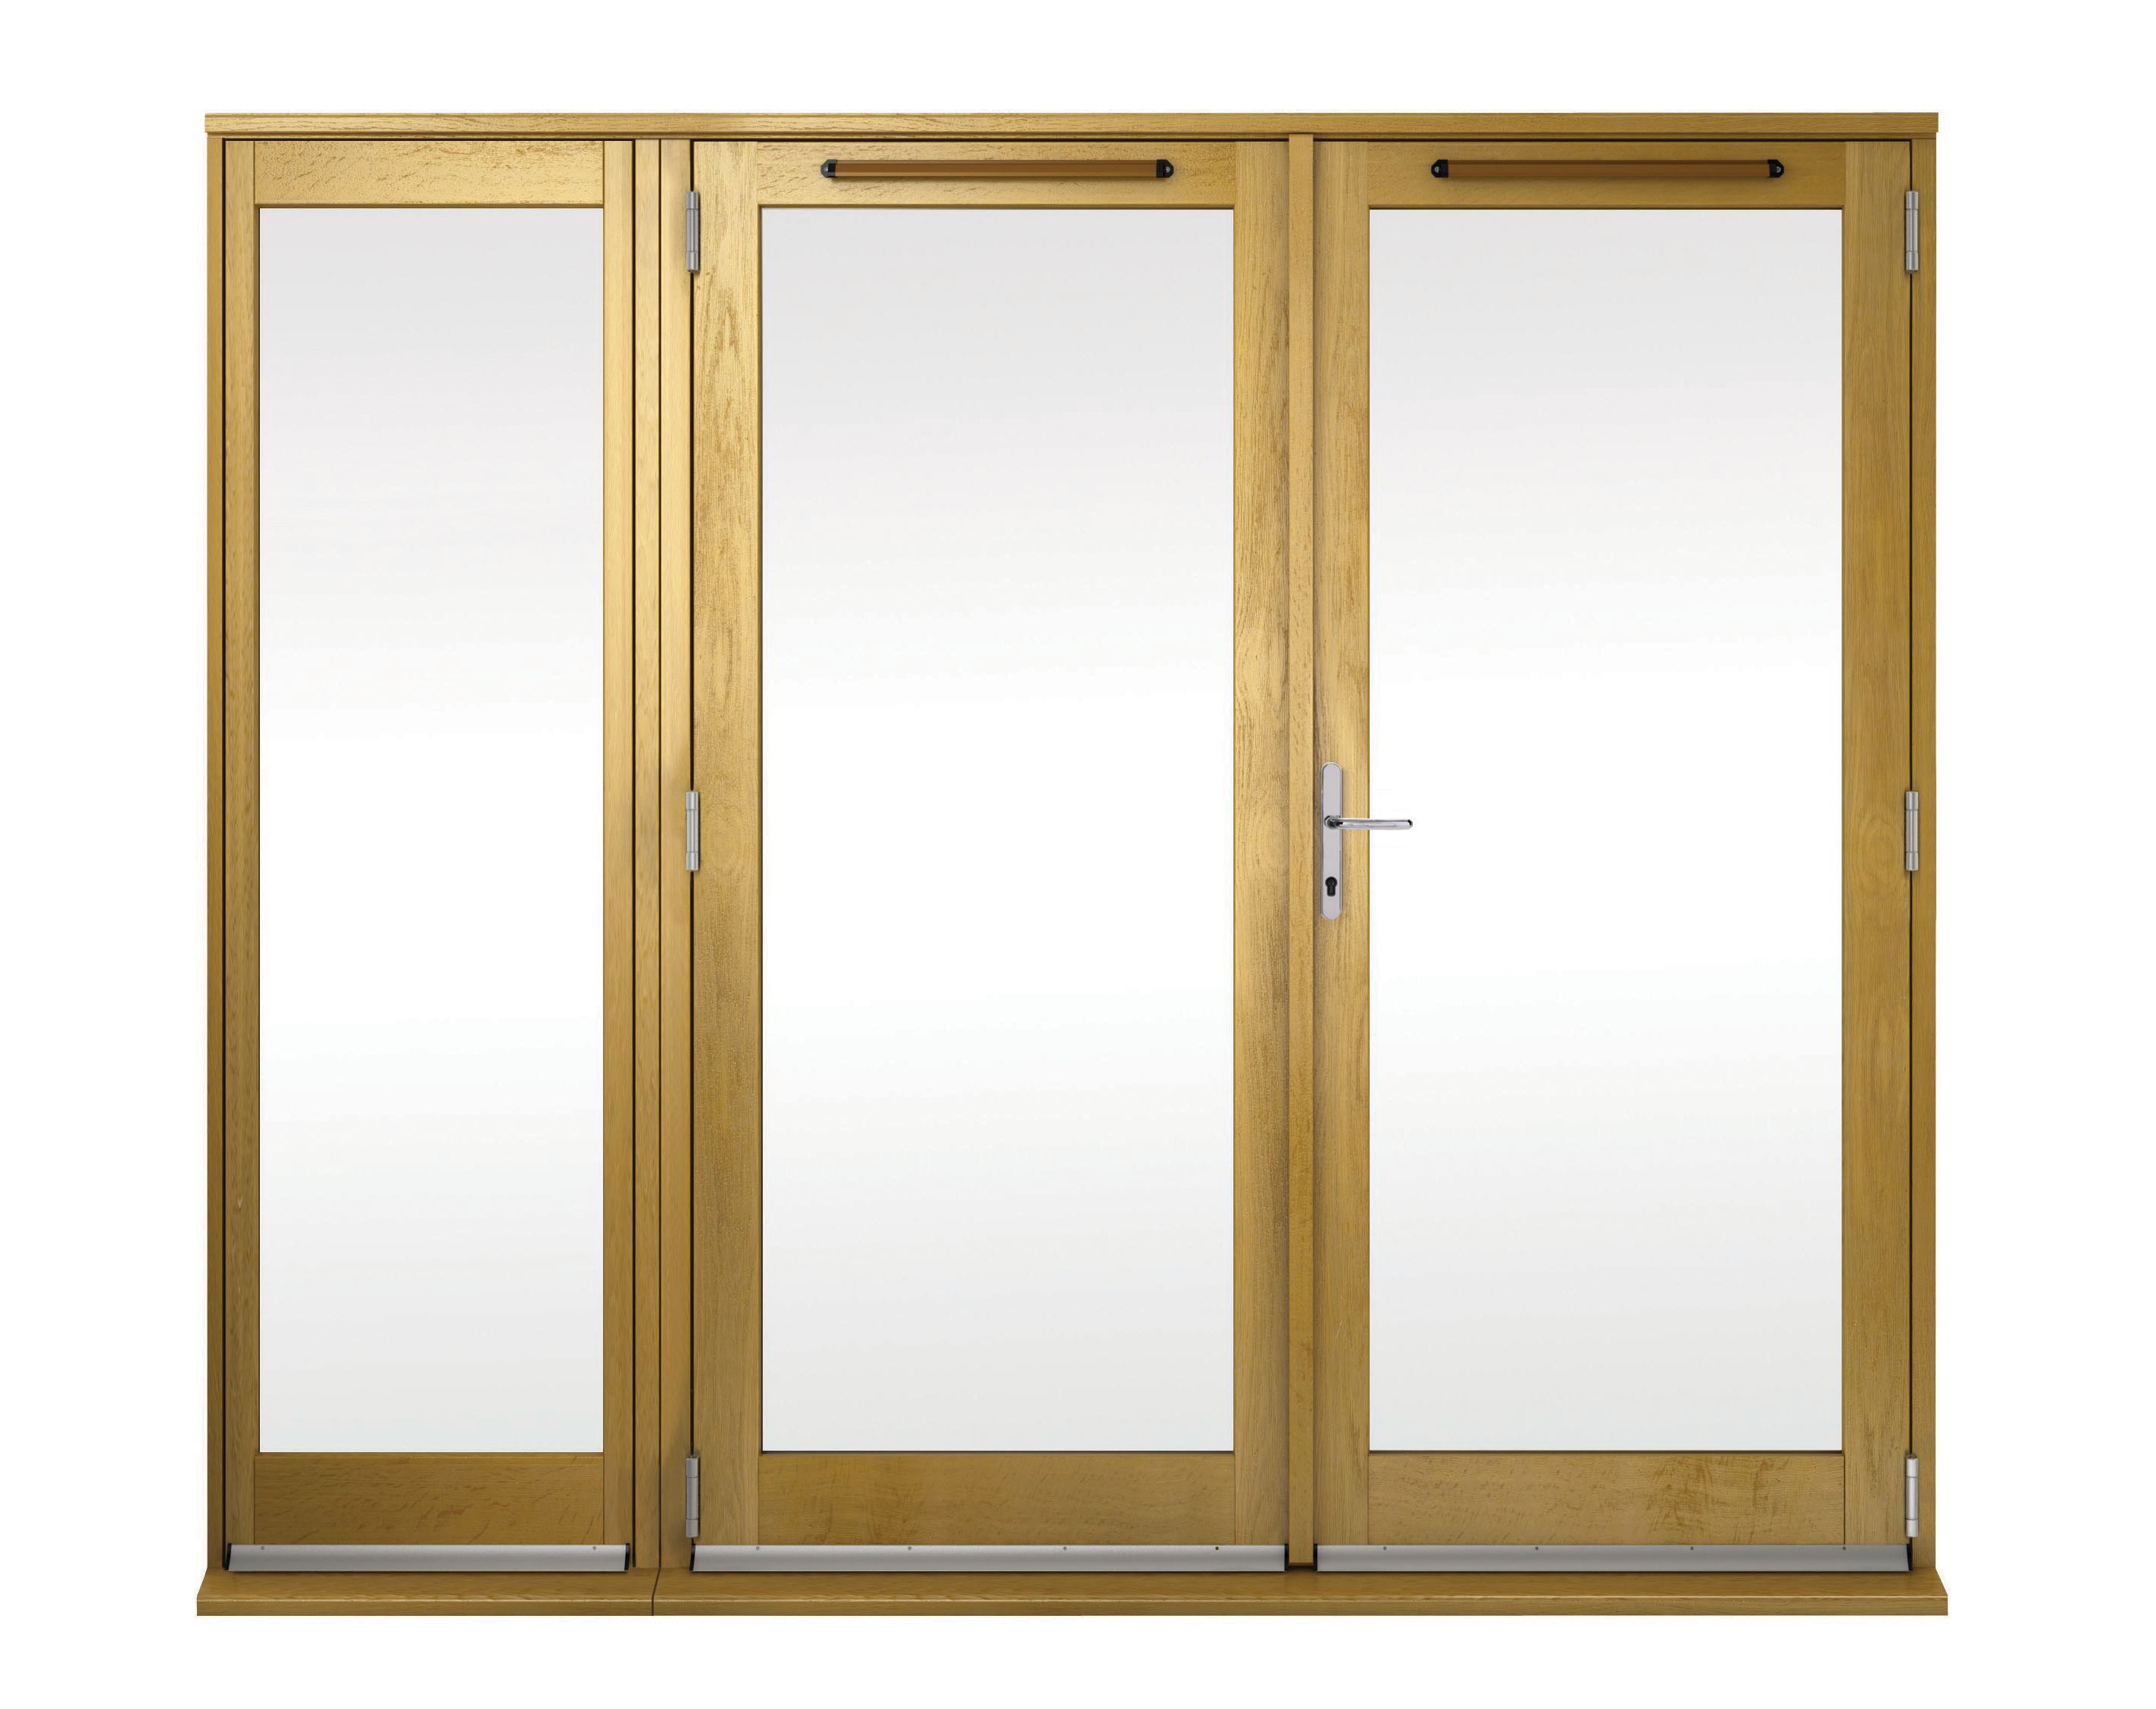 Image of Wickes Albery Pattern 10 Solid Oak Laminate French Doors 6ft with 1 Side Lite 600mm